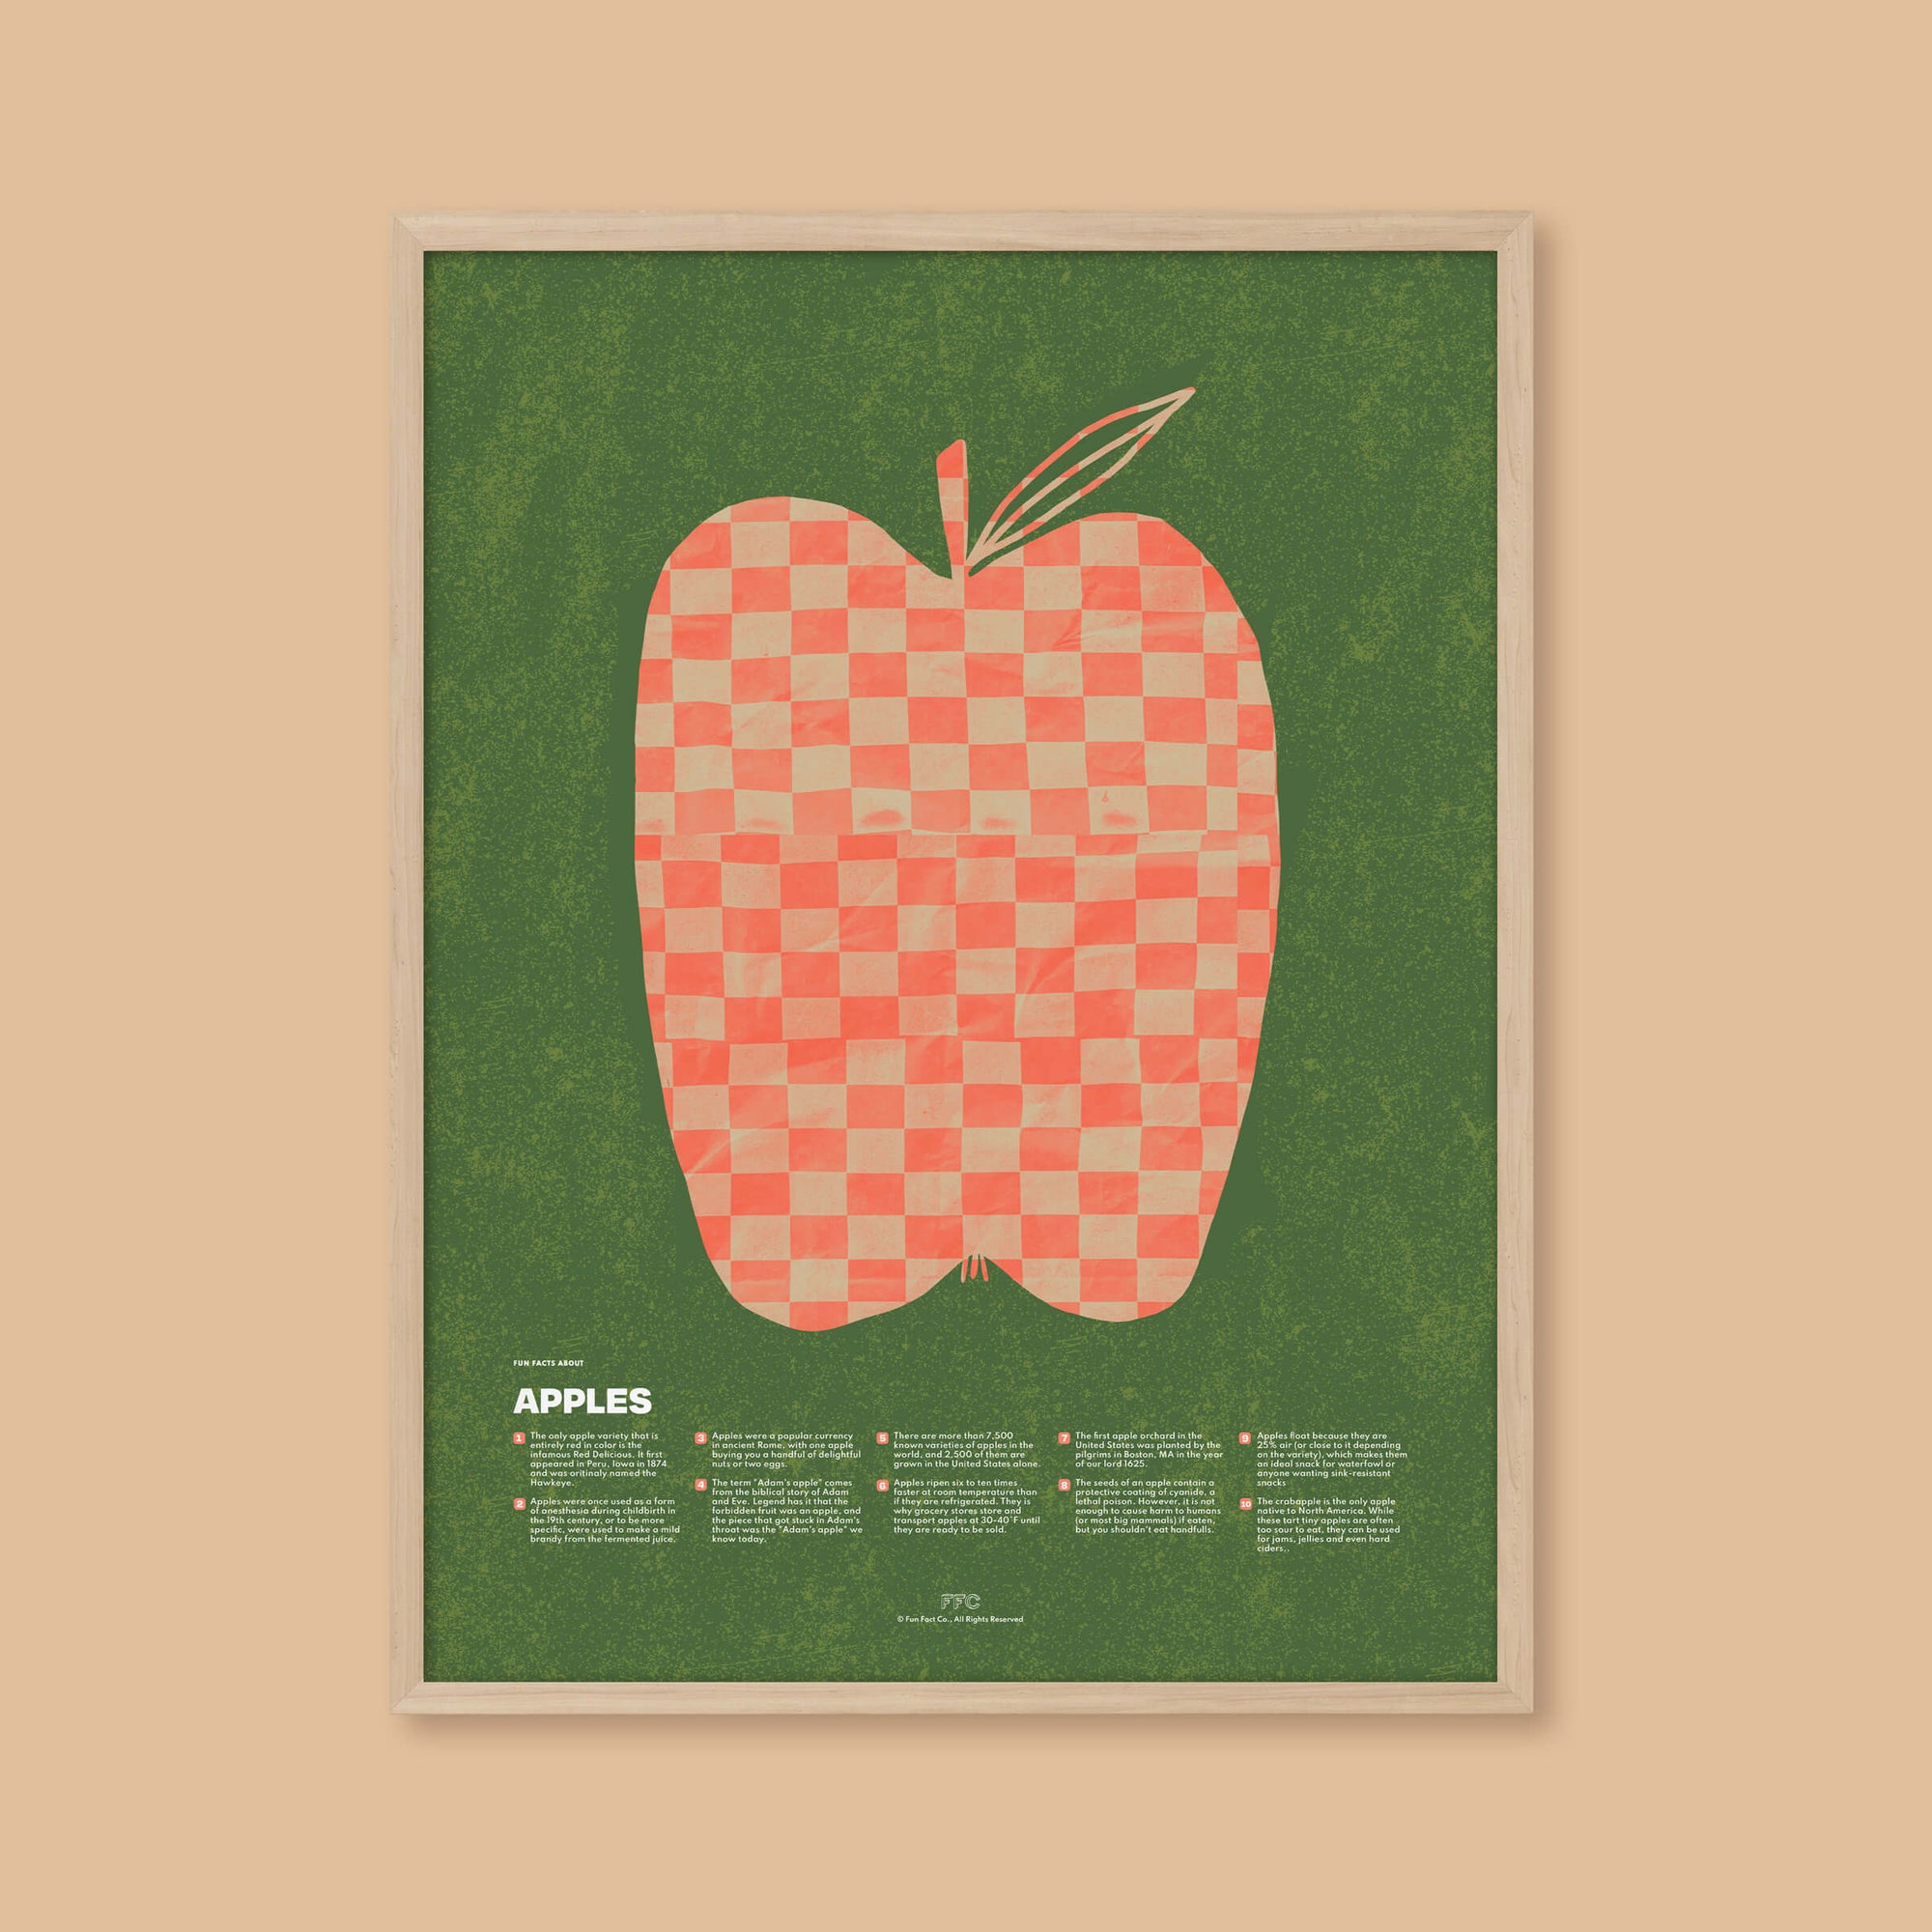 Apple Fun Facts Print - Natural Frame - Educational Poster by Fun Fact Co.